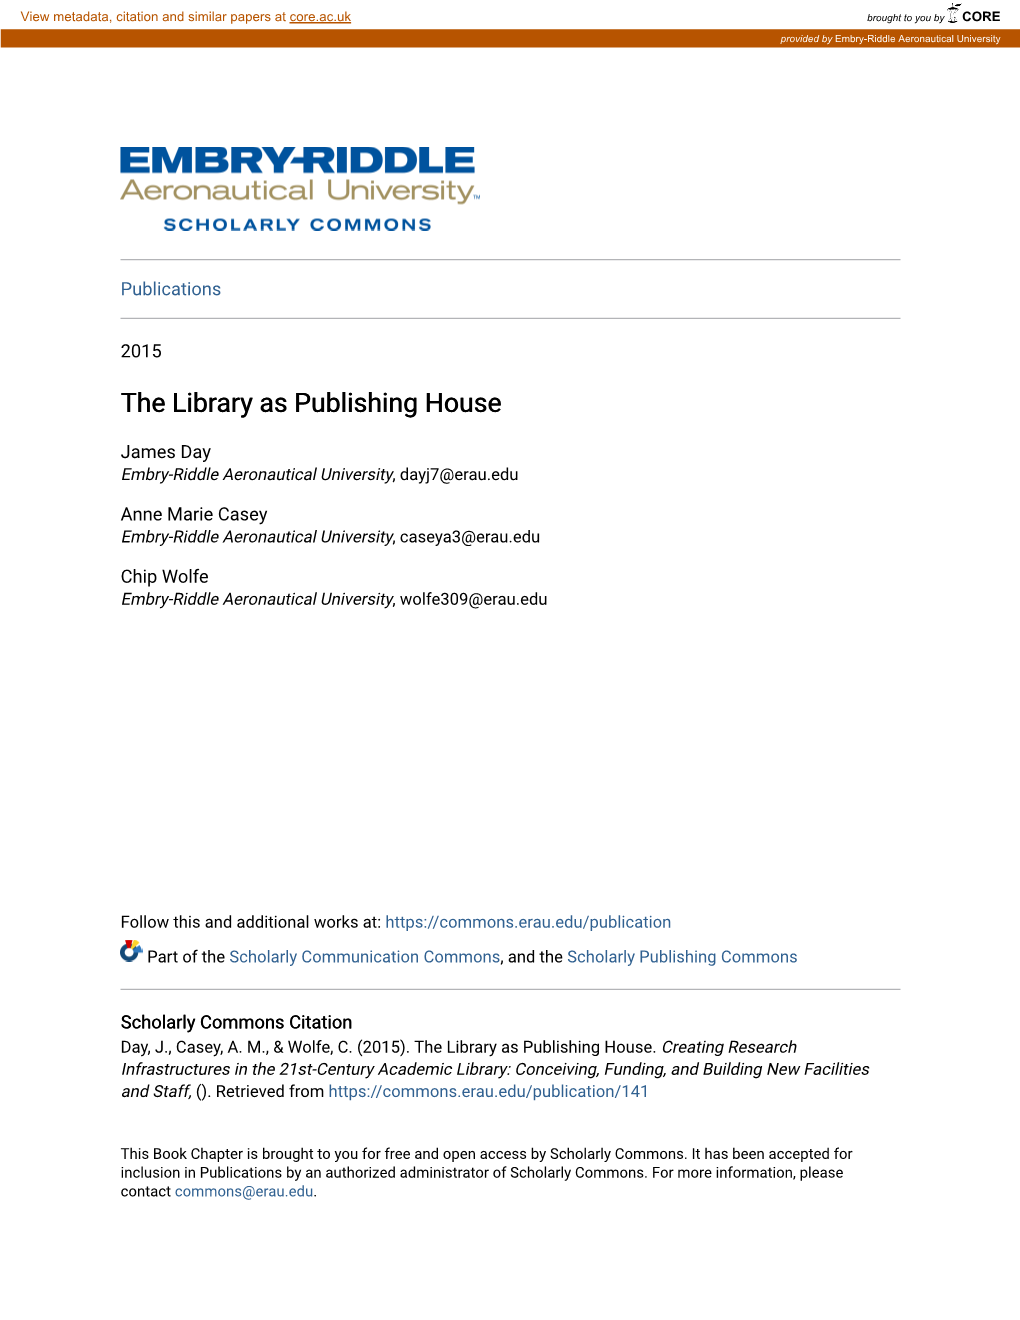 The Library As Publishing House